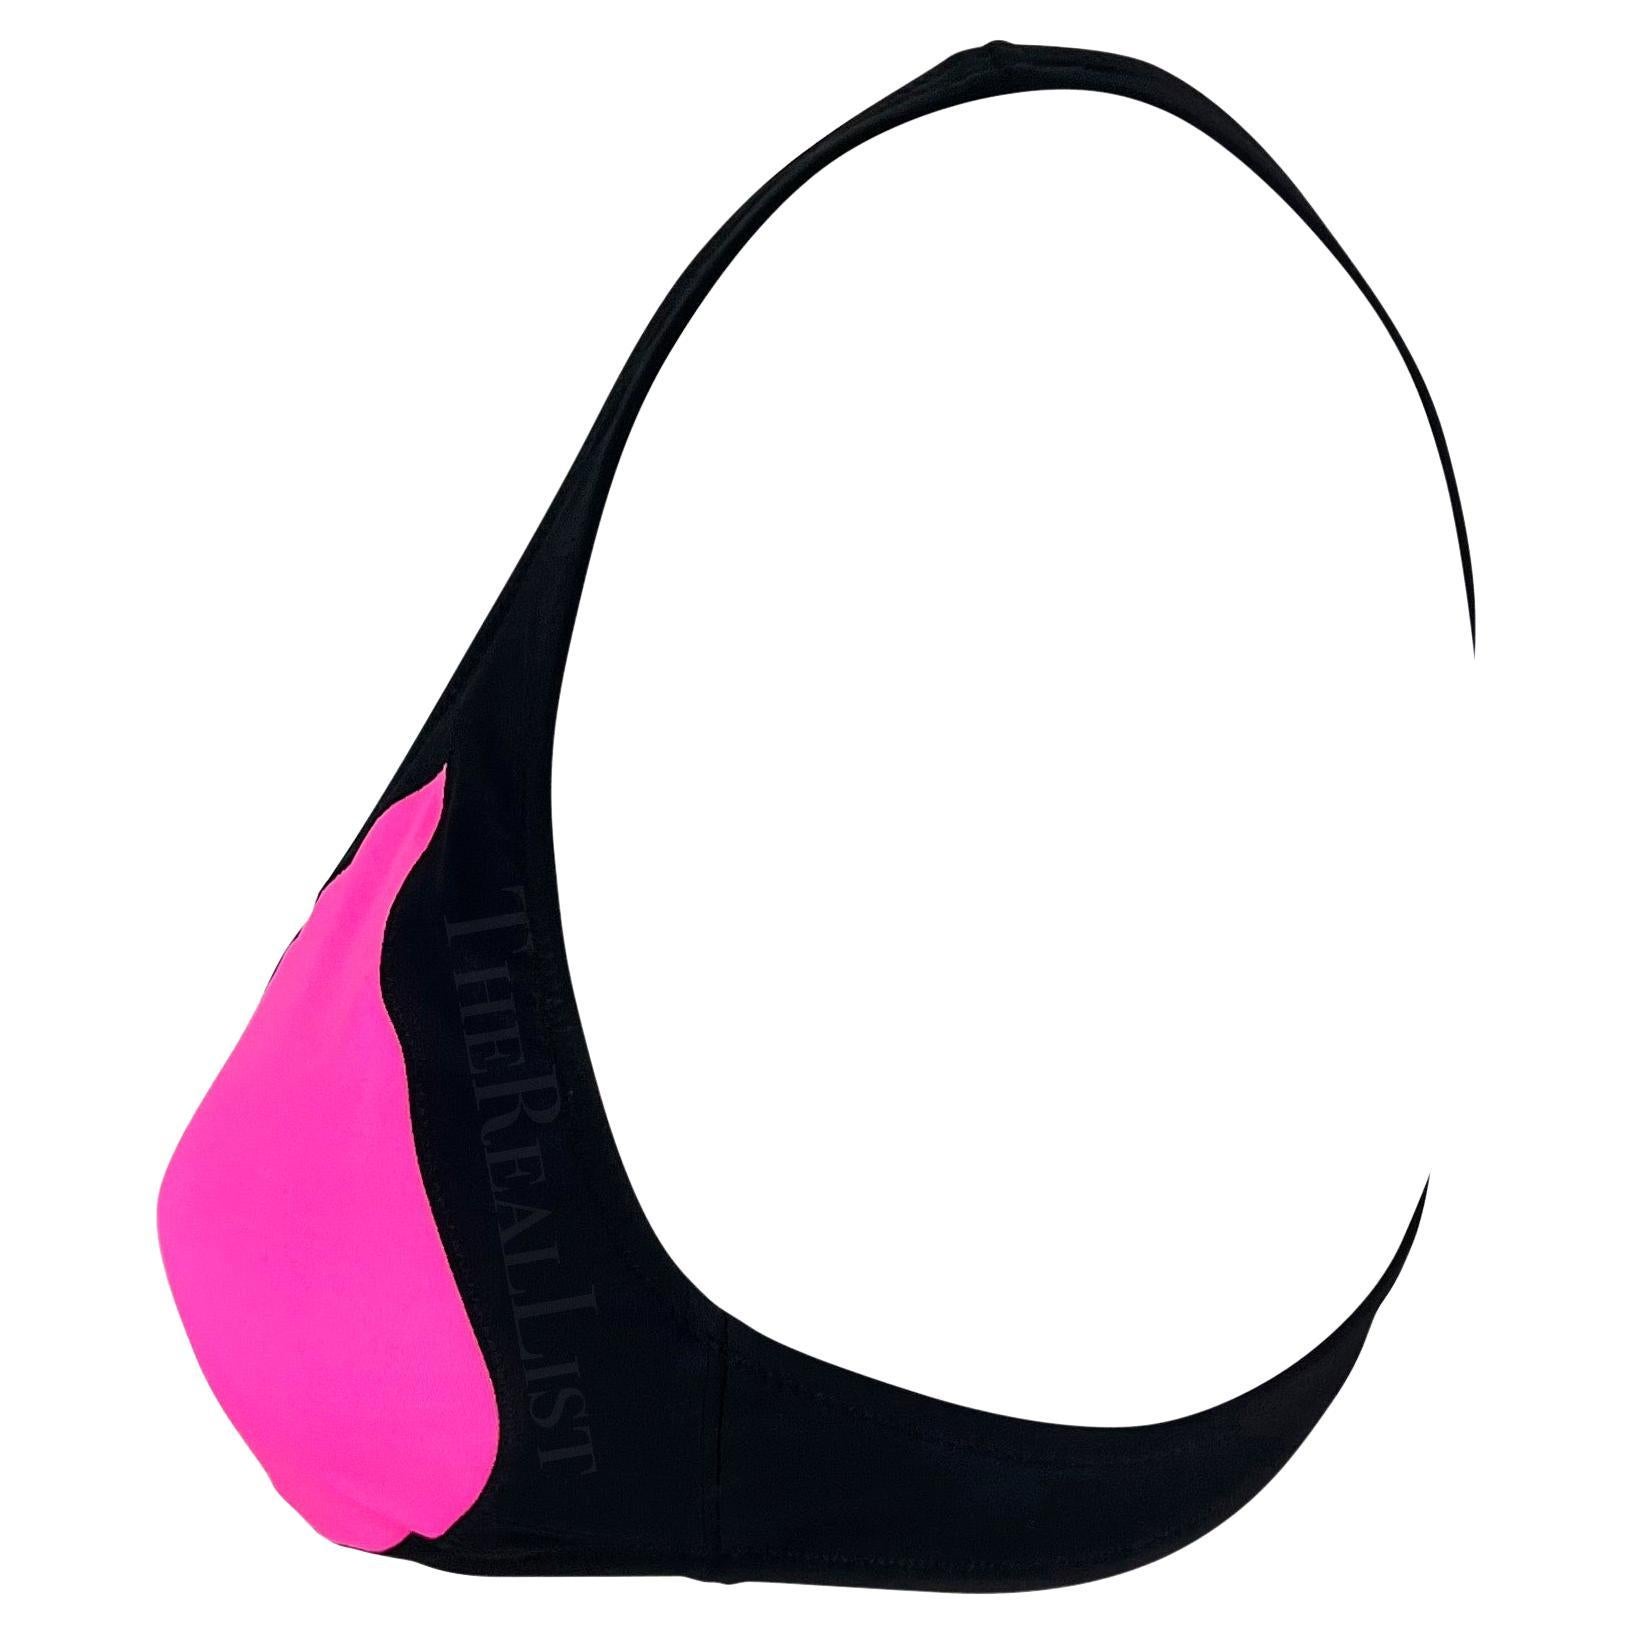 Resort 2009 Alexander McQueen Black Hot Pink Bralette Bikini Top In Excellent Condition For Sale In West Hollywood, CA